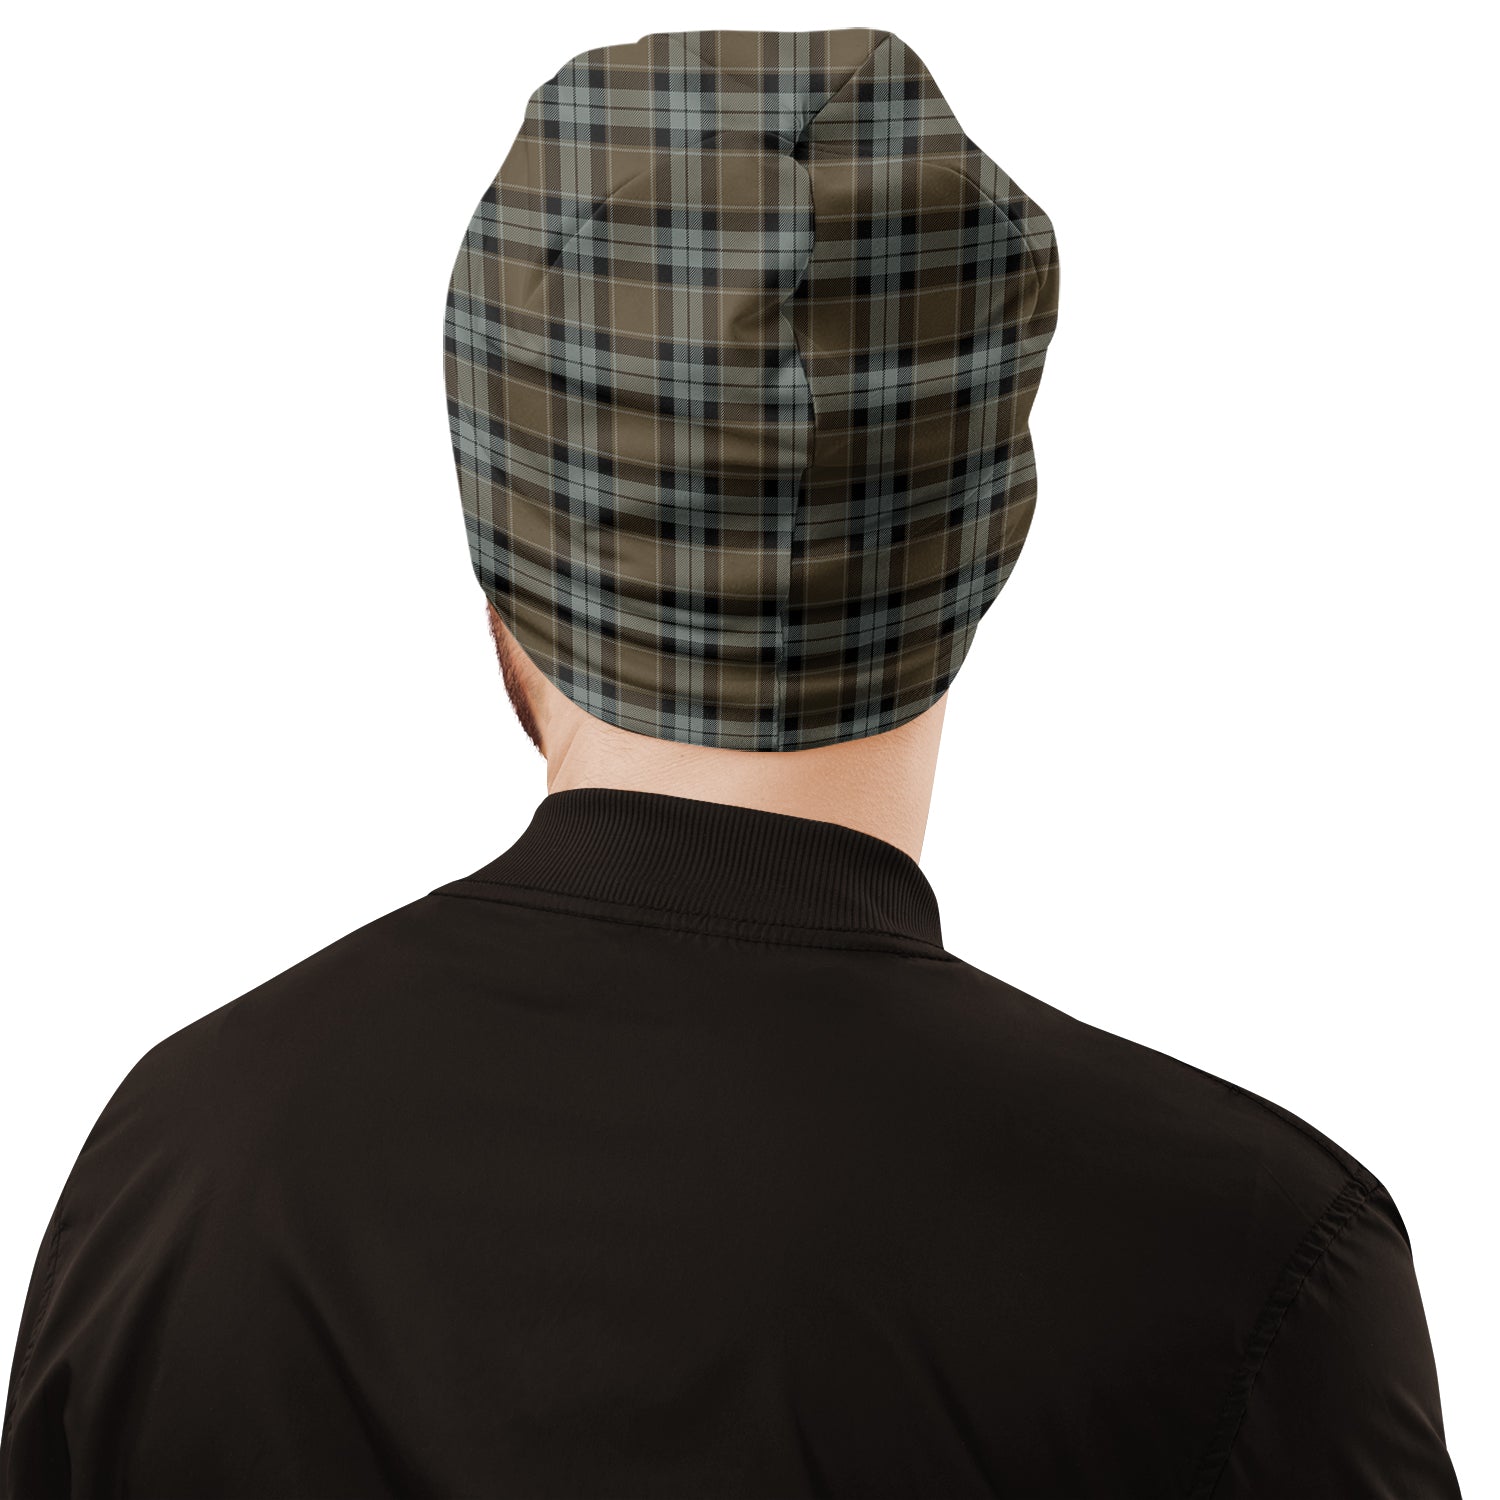 graham-of-menteith-weathered-tartan-beanies-hat-with-family-crest